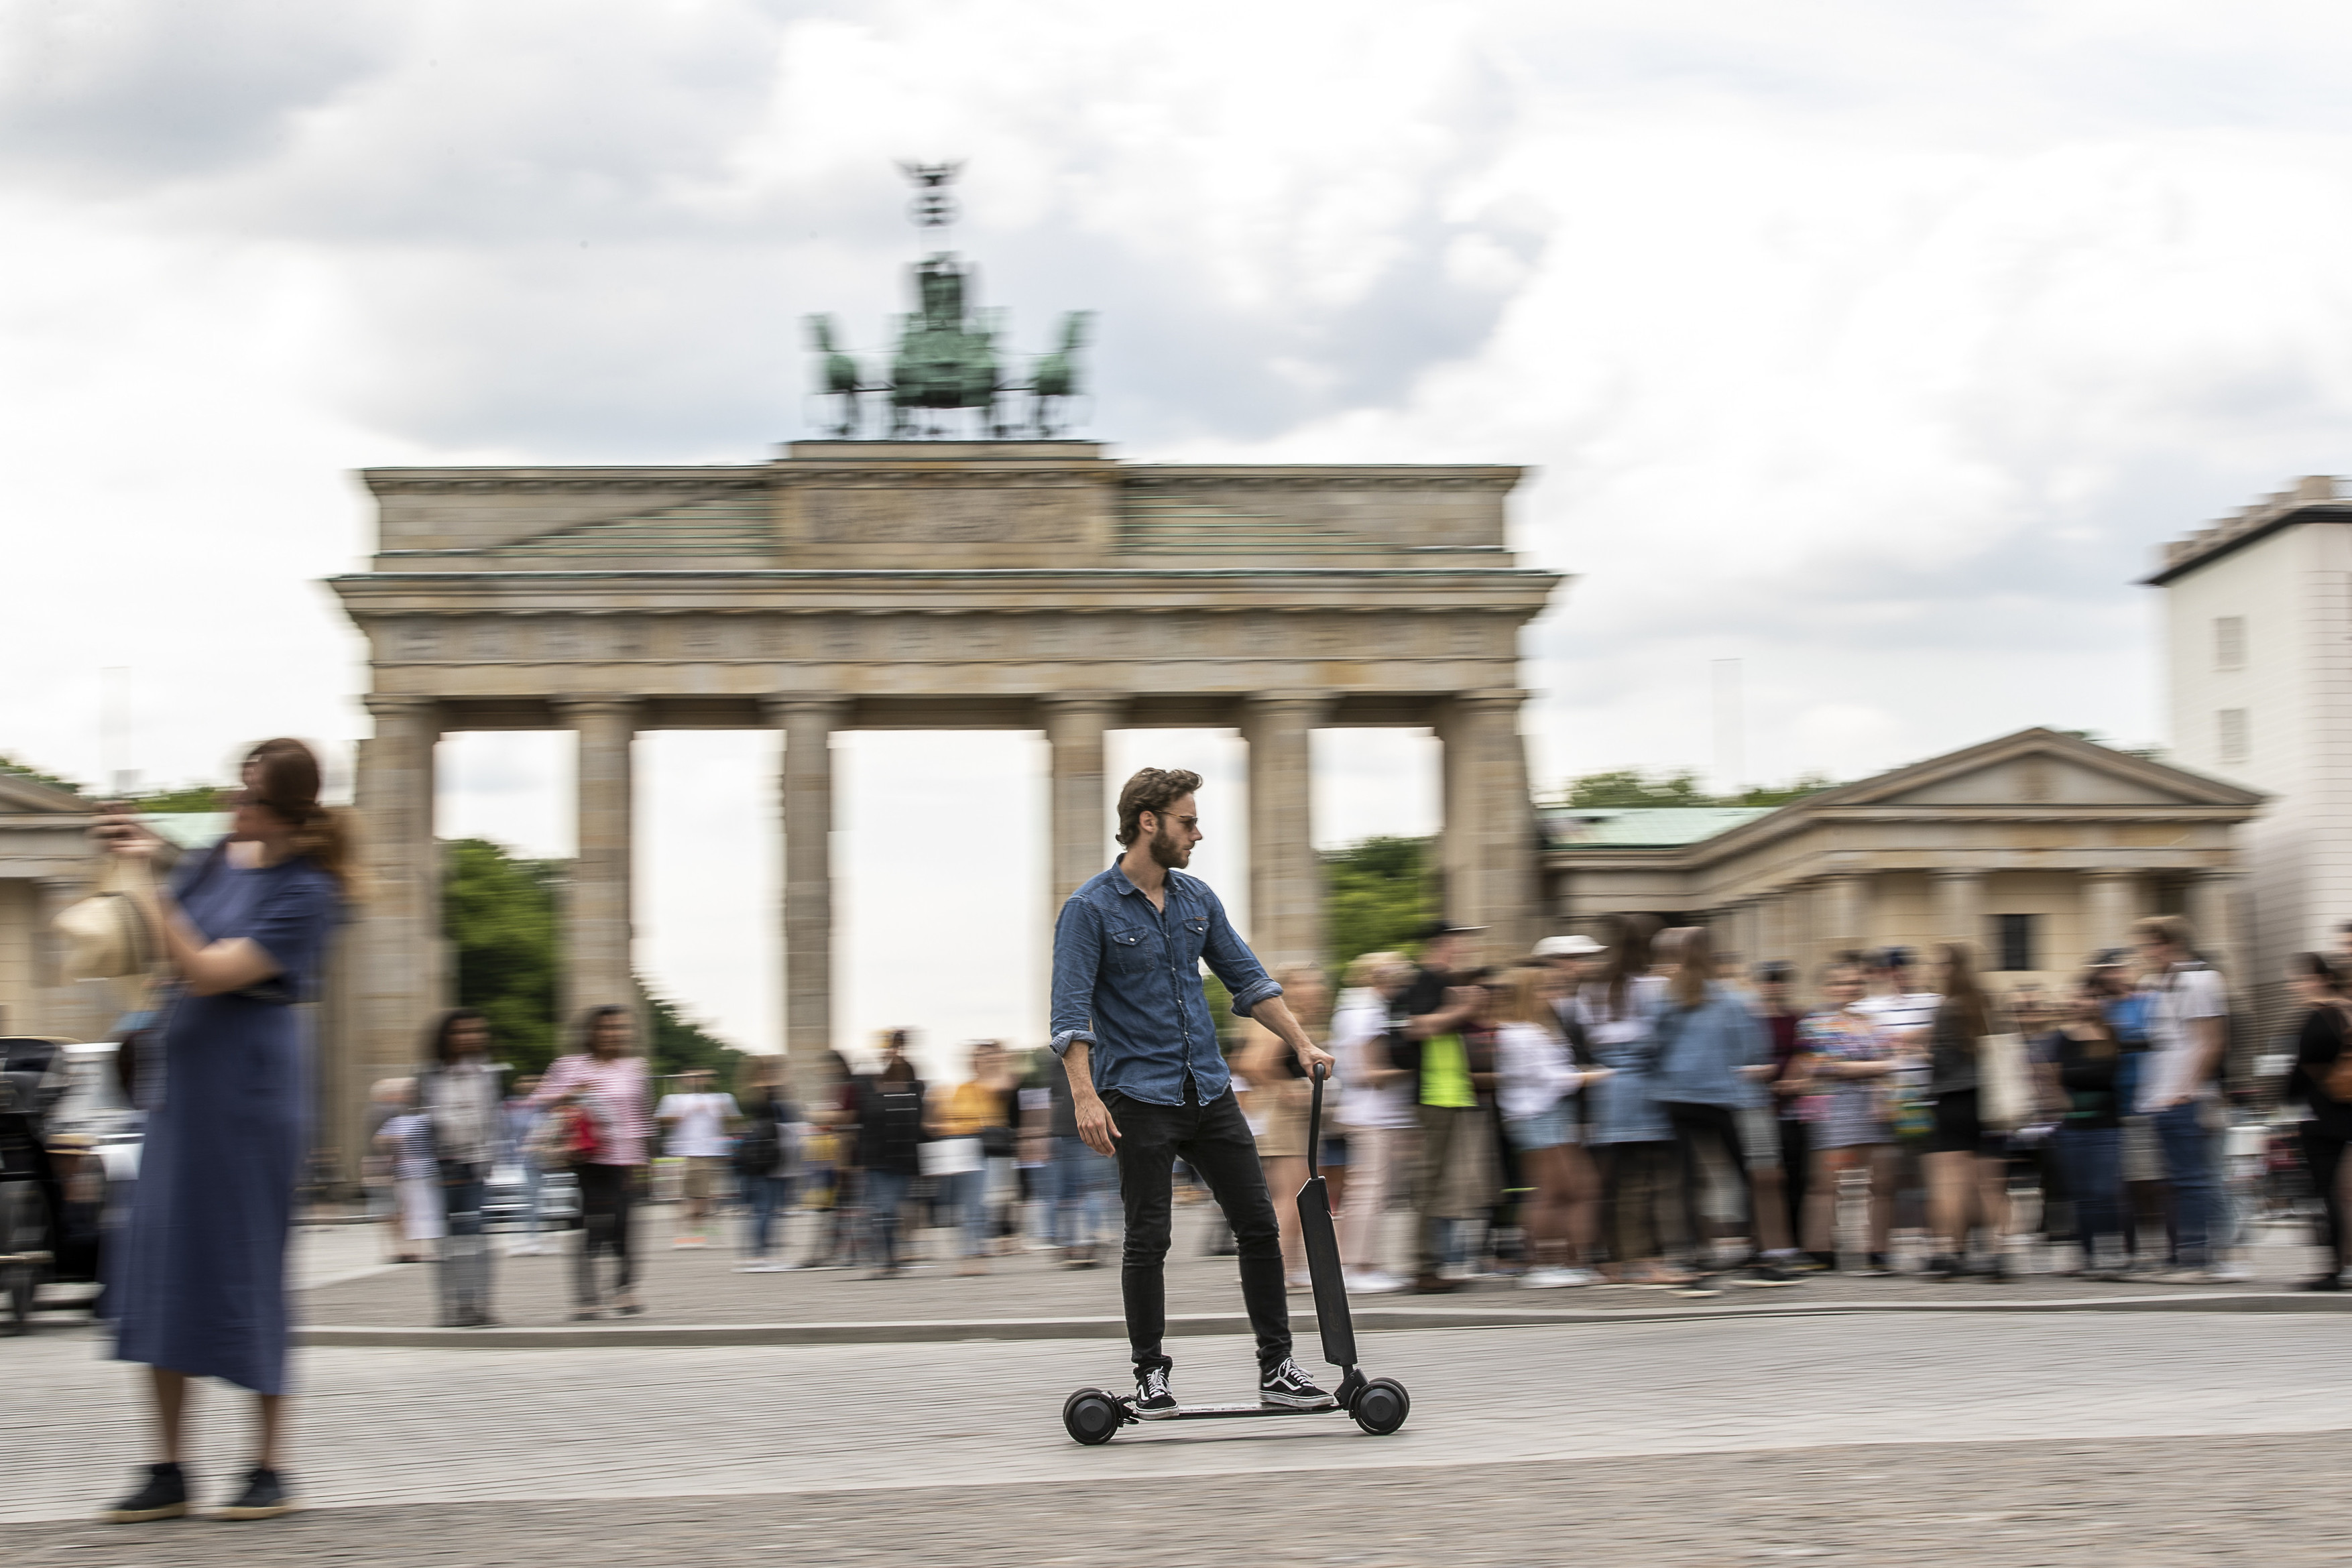 Audi's new scooter might actually solve a major problem with scooters